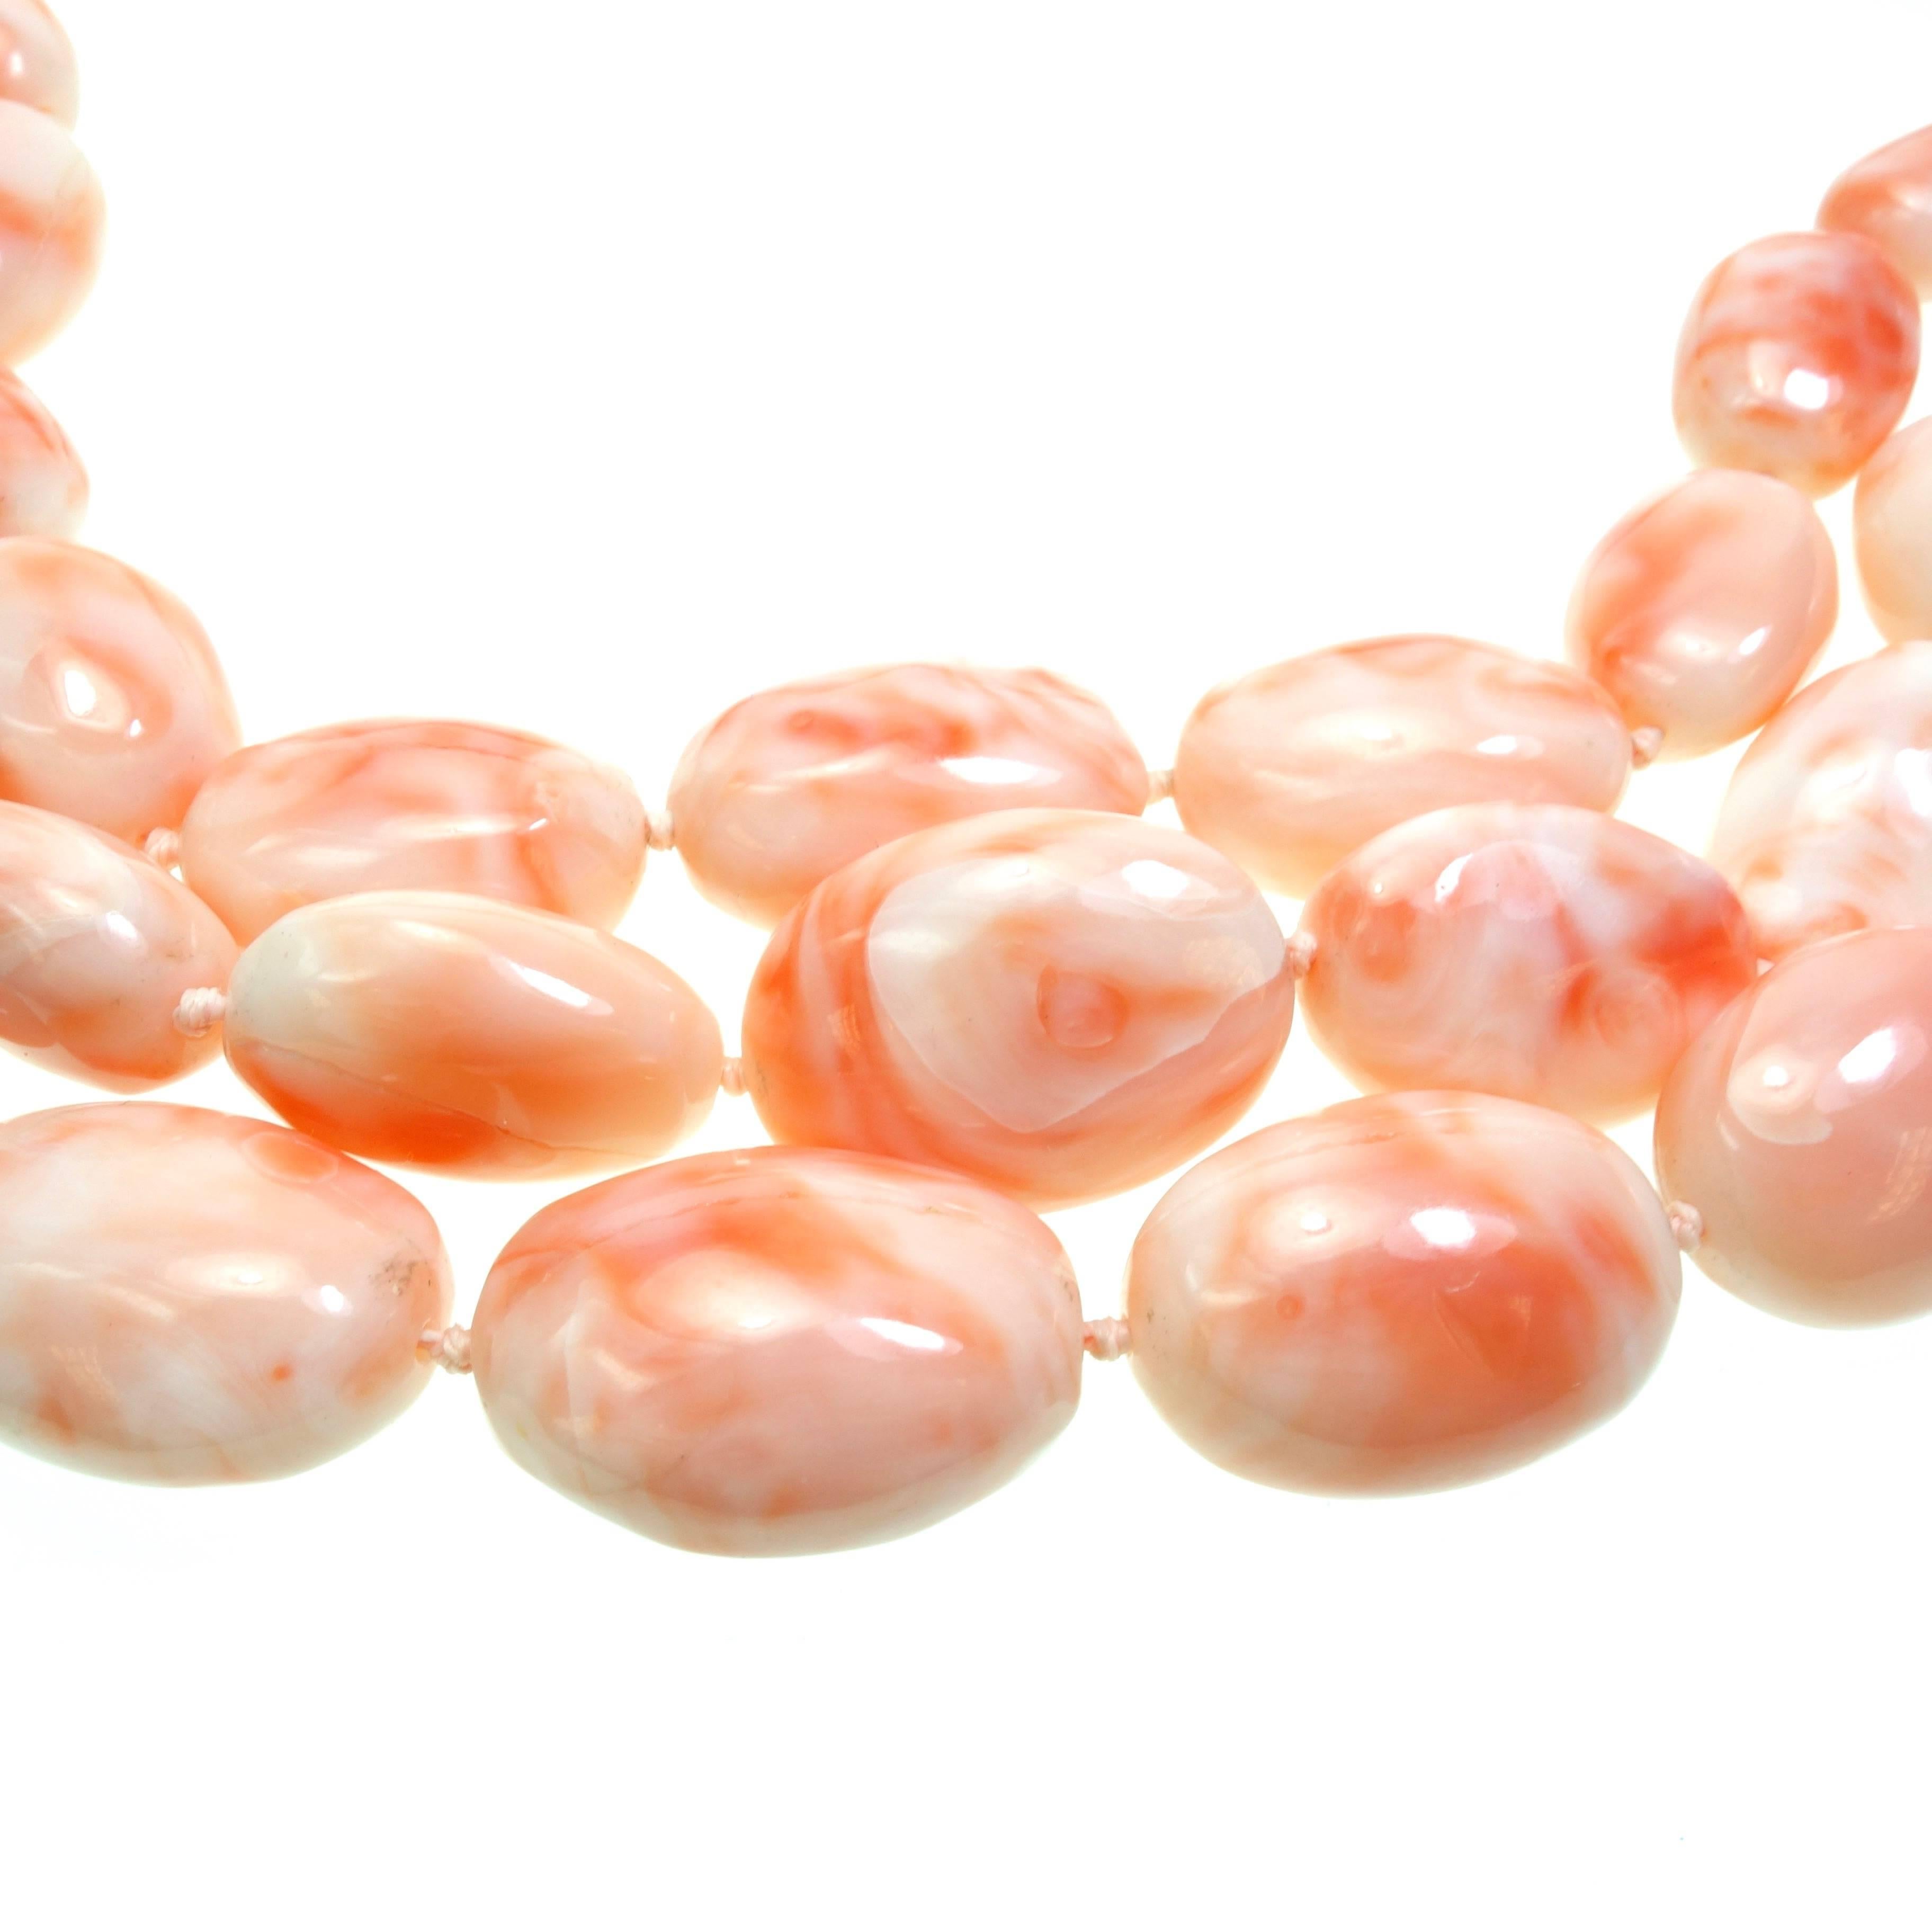 Gorgeous triple strand Angel Coral large beads necklace from Cristina Ferrare's jewelry line. The meads are measuring from 13x10mm up to 24x18mm. Seventeen inch length terminating in a 14K yellow gold clasp with the designer's logo. 
Weight: 262